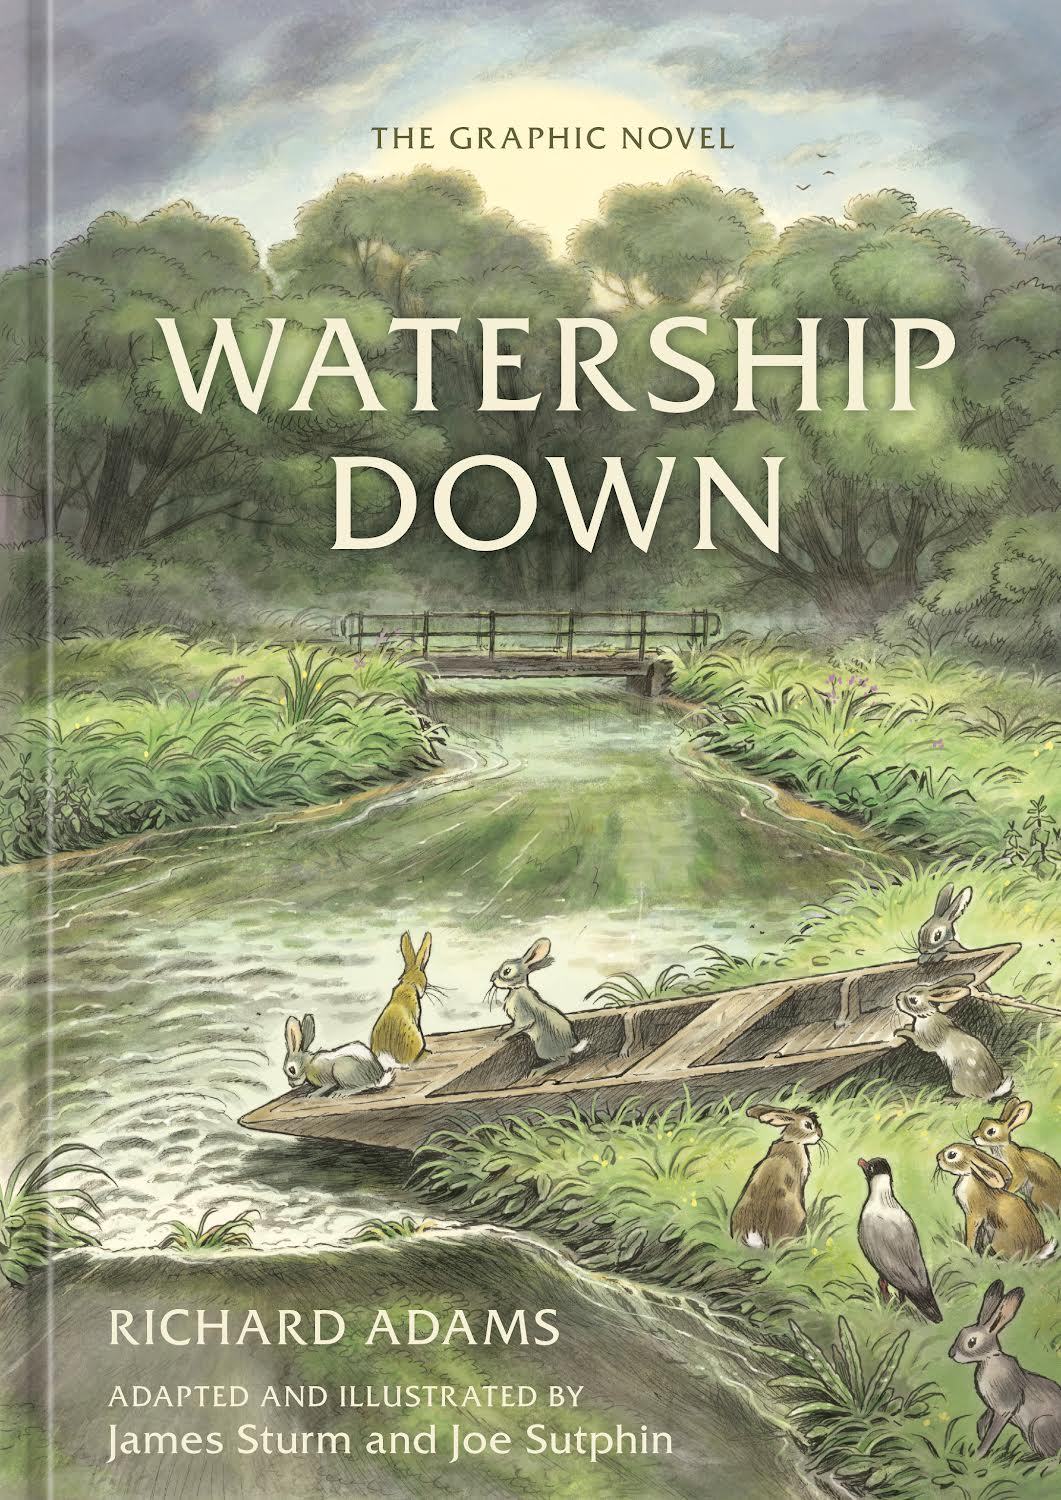 Re-experiencing Stories In Whole New and Thrilling Ways: An Interview with the Team Behind the Watership Down Graphic Novel Adaptation